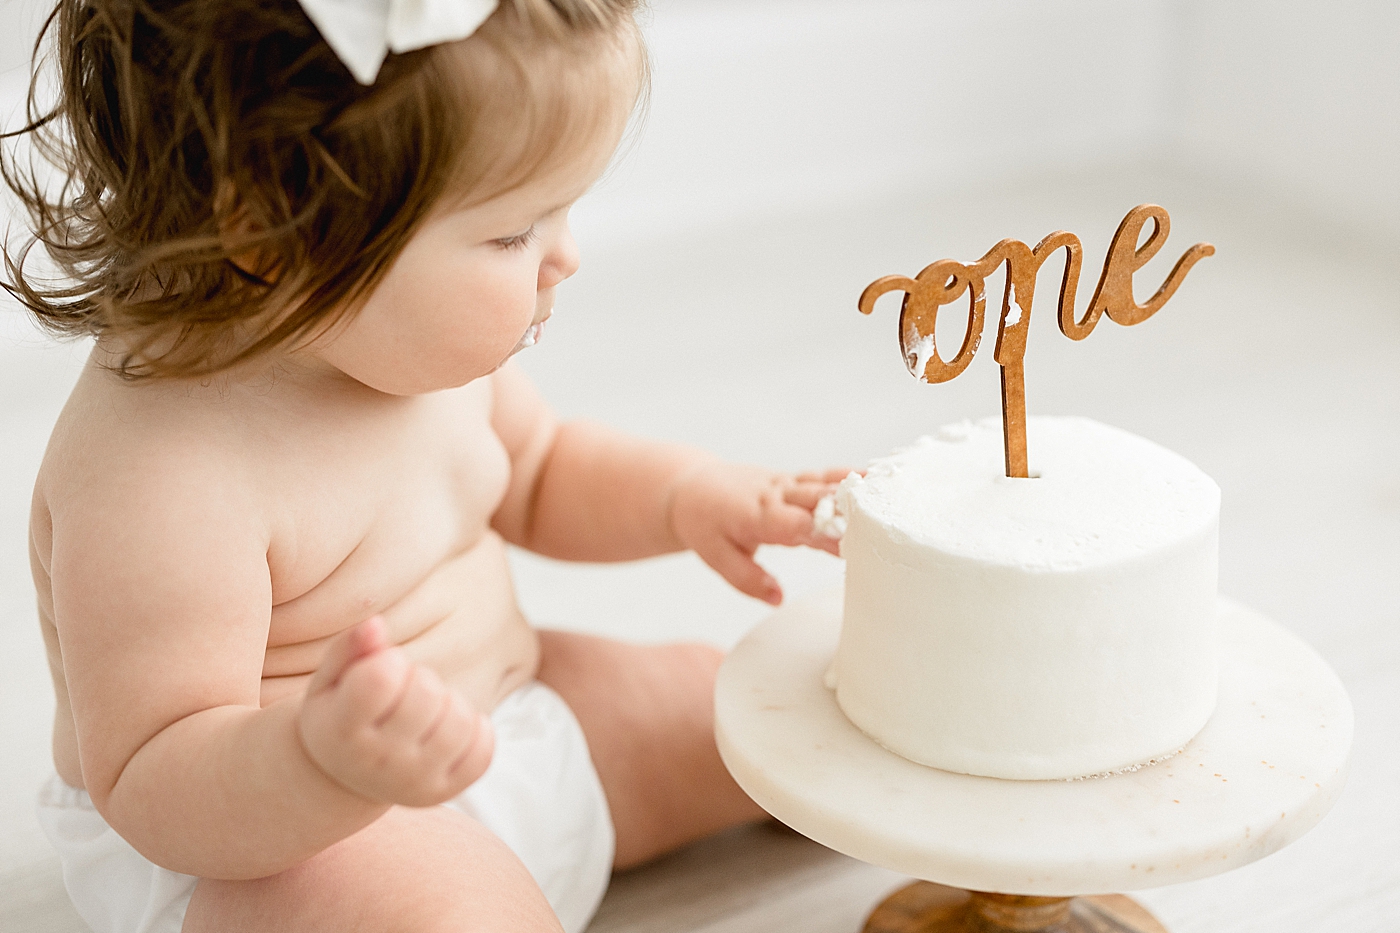 Cake smash for first birthday in Tampa studio. Photo by Brittany Elise Photography.